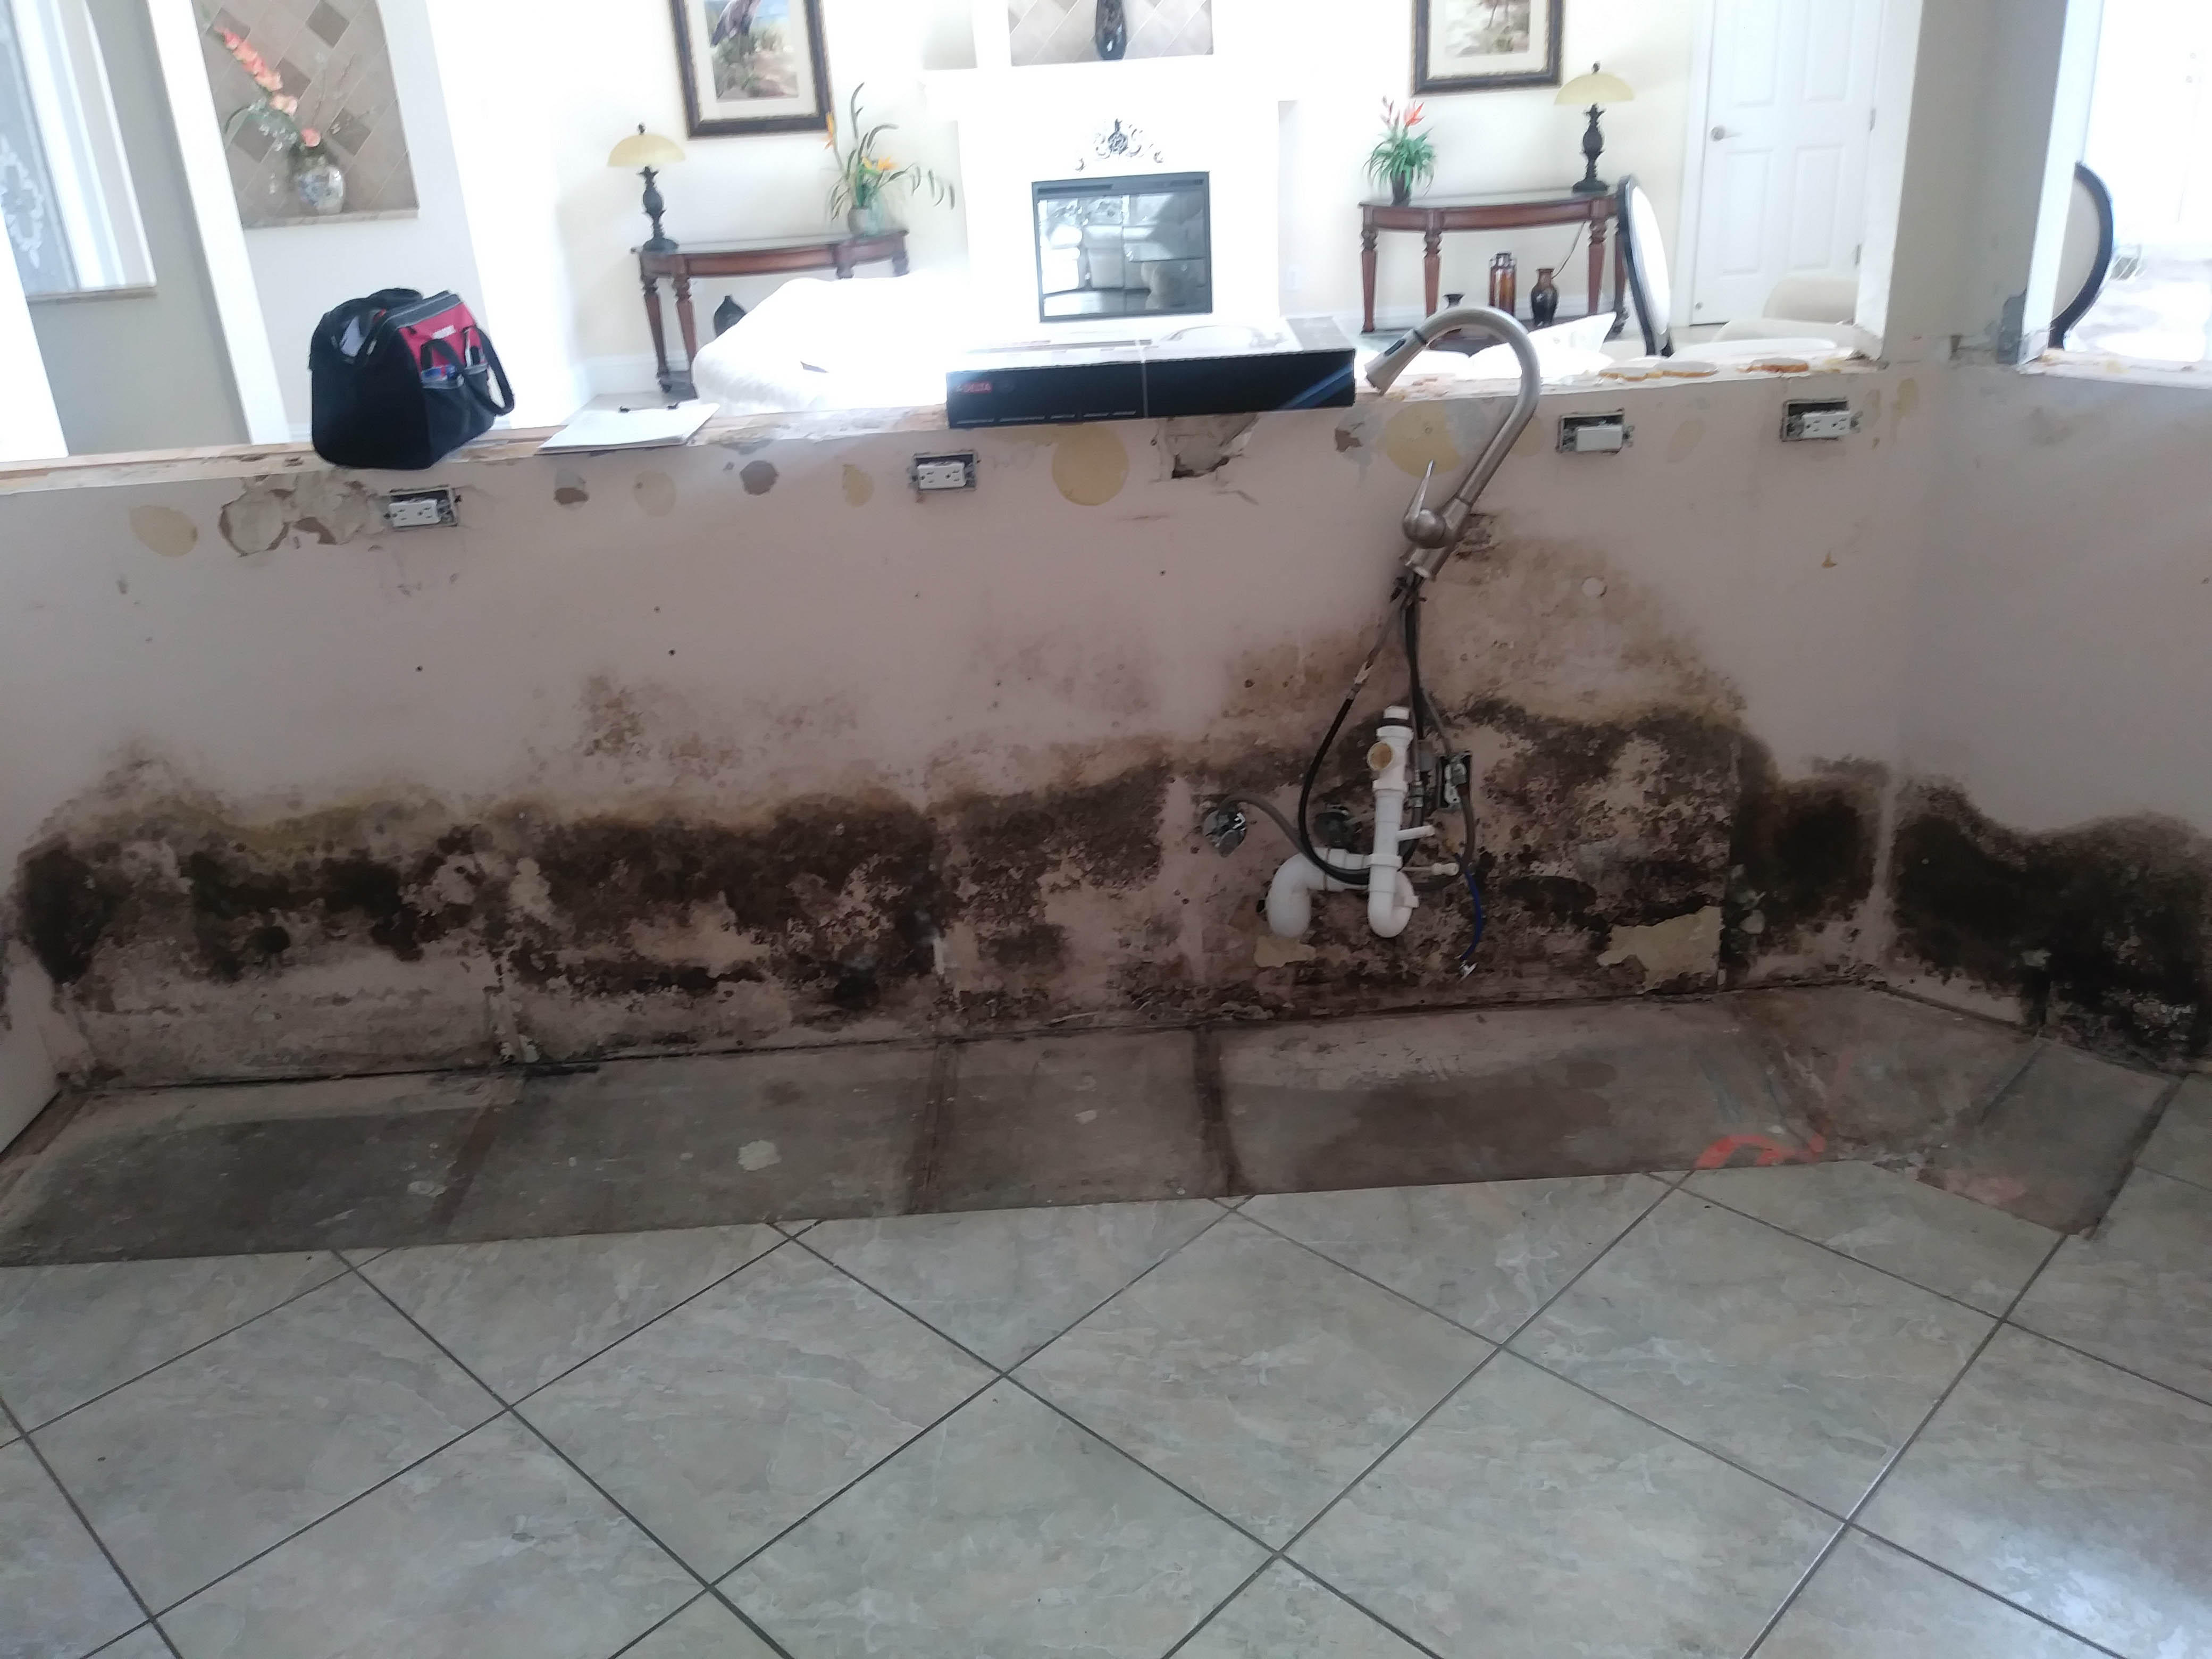 Mold growth can occur within 48-72 hours after water damage. SERVPRO of Cape Coral has the advanced training to rid your property of mold.